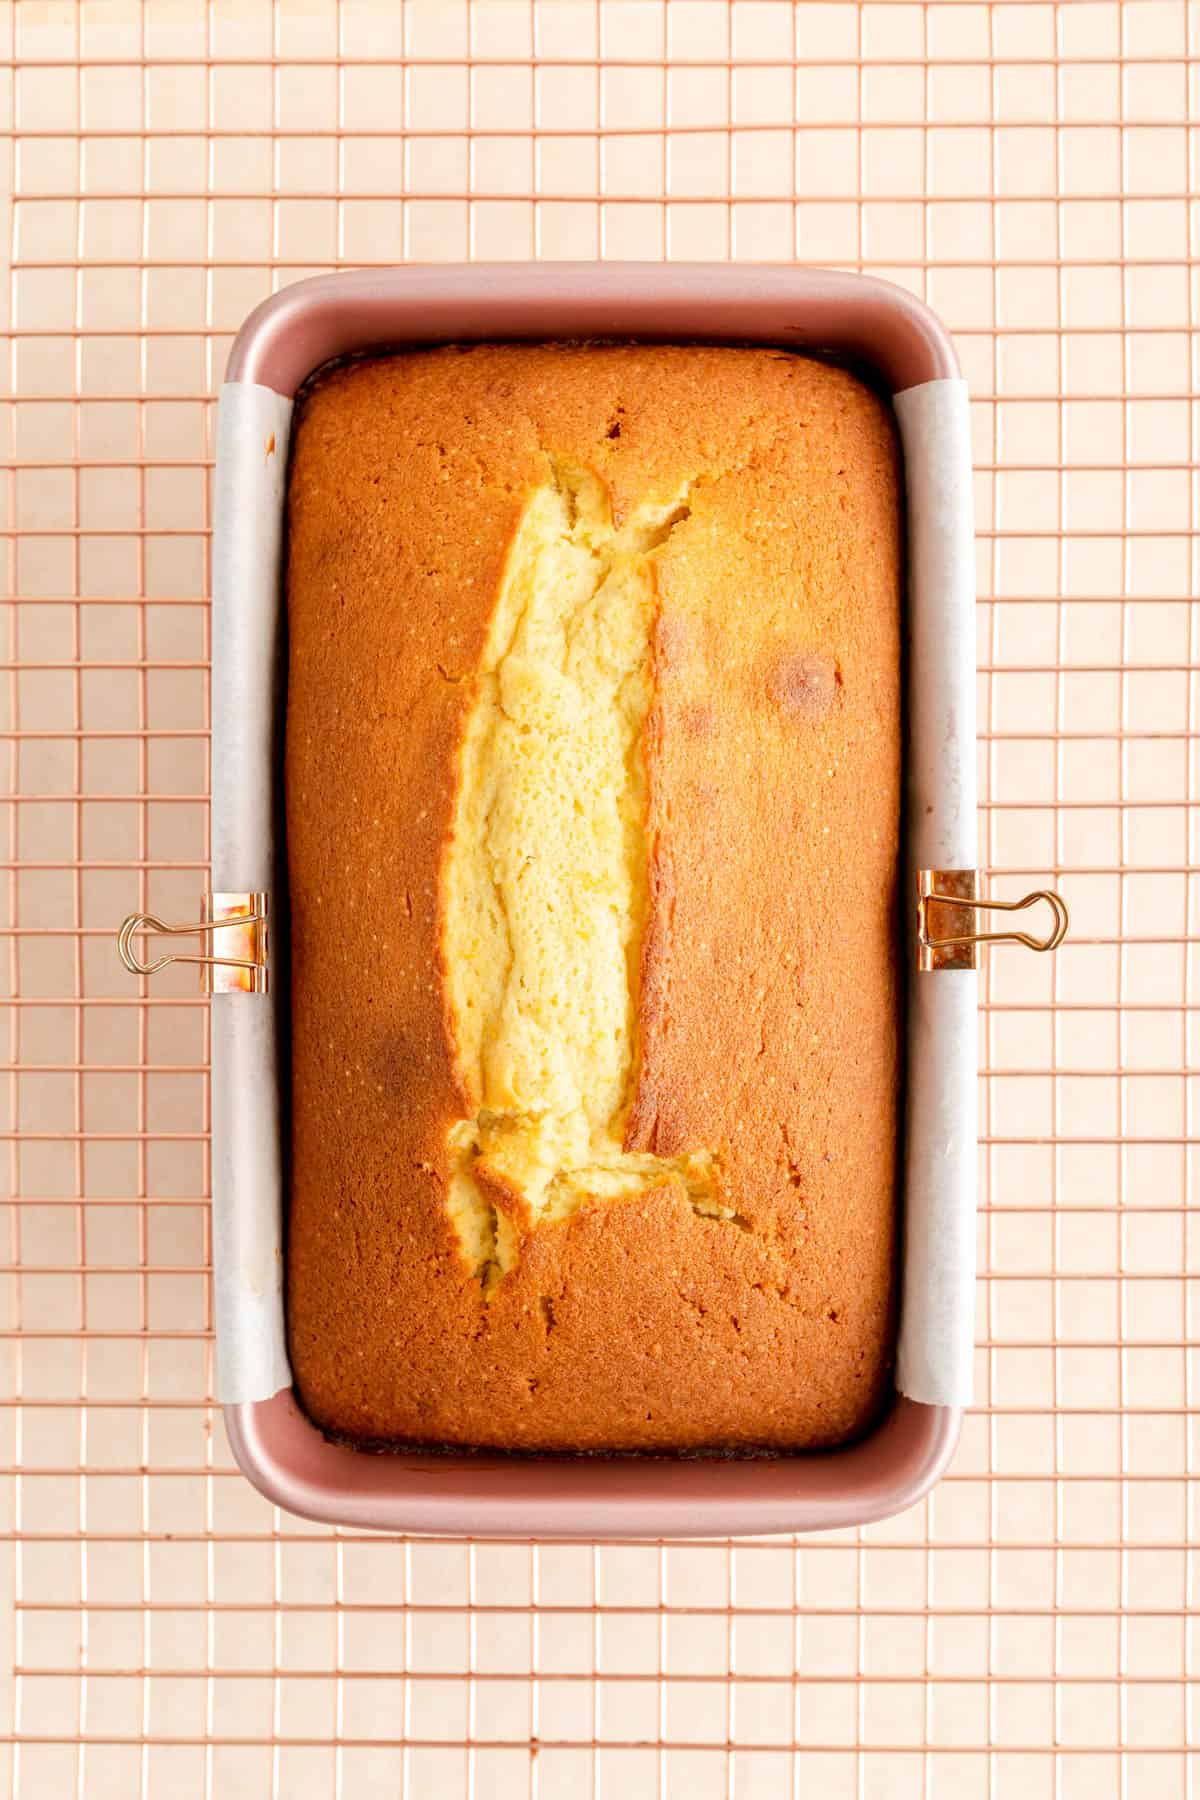 a fully baked citrus pound cake in a pink pan on a copper wire rack.